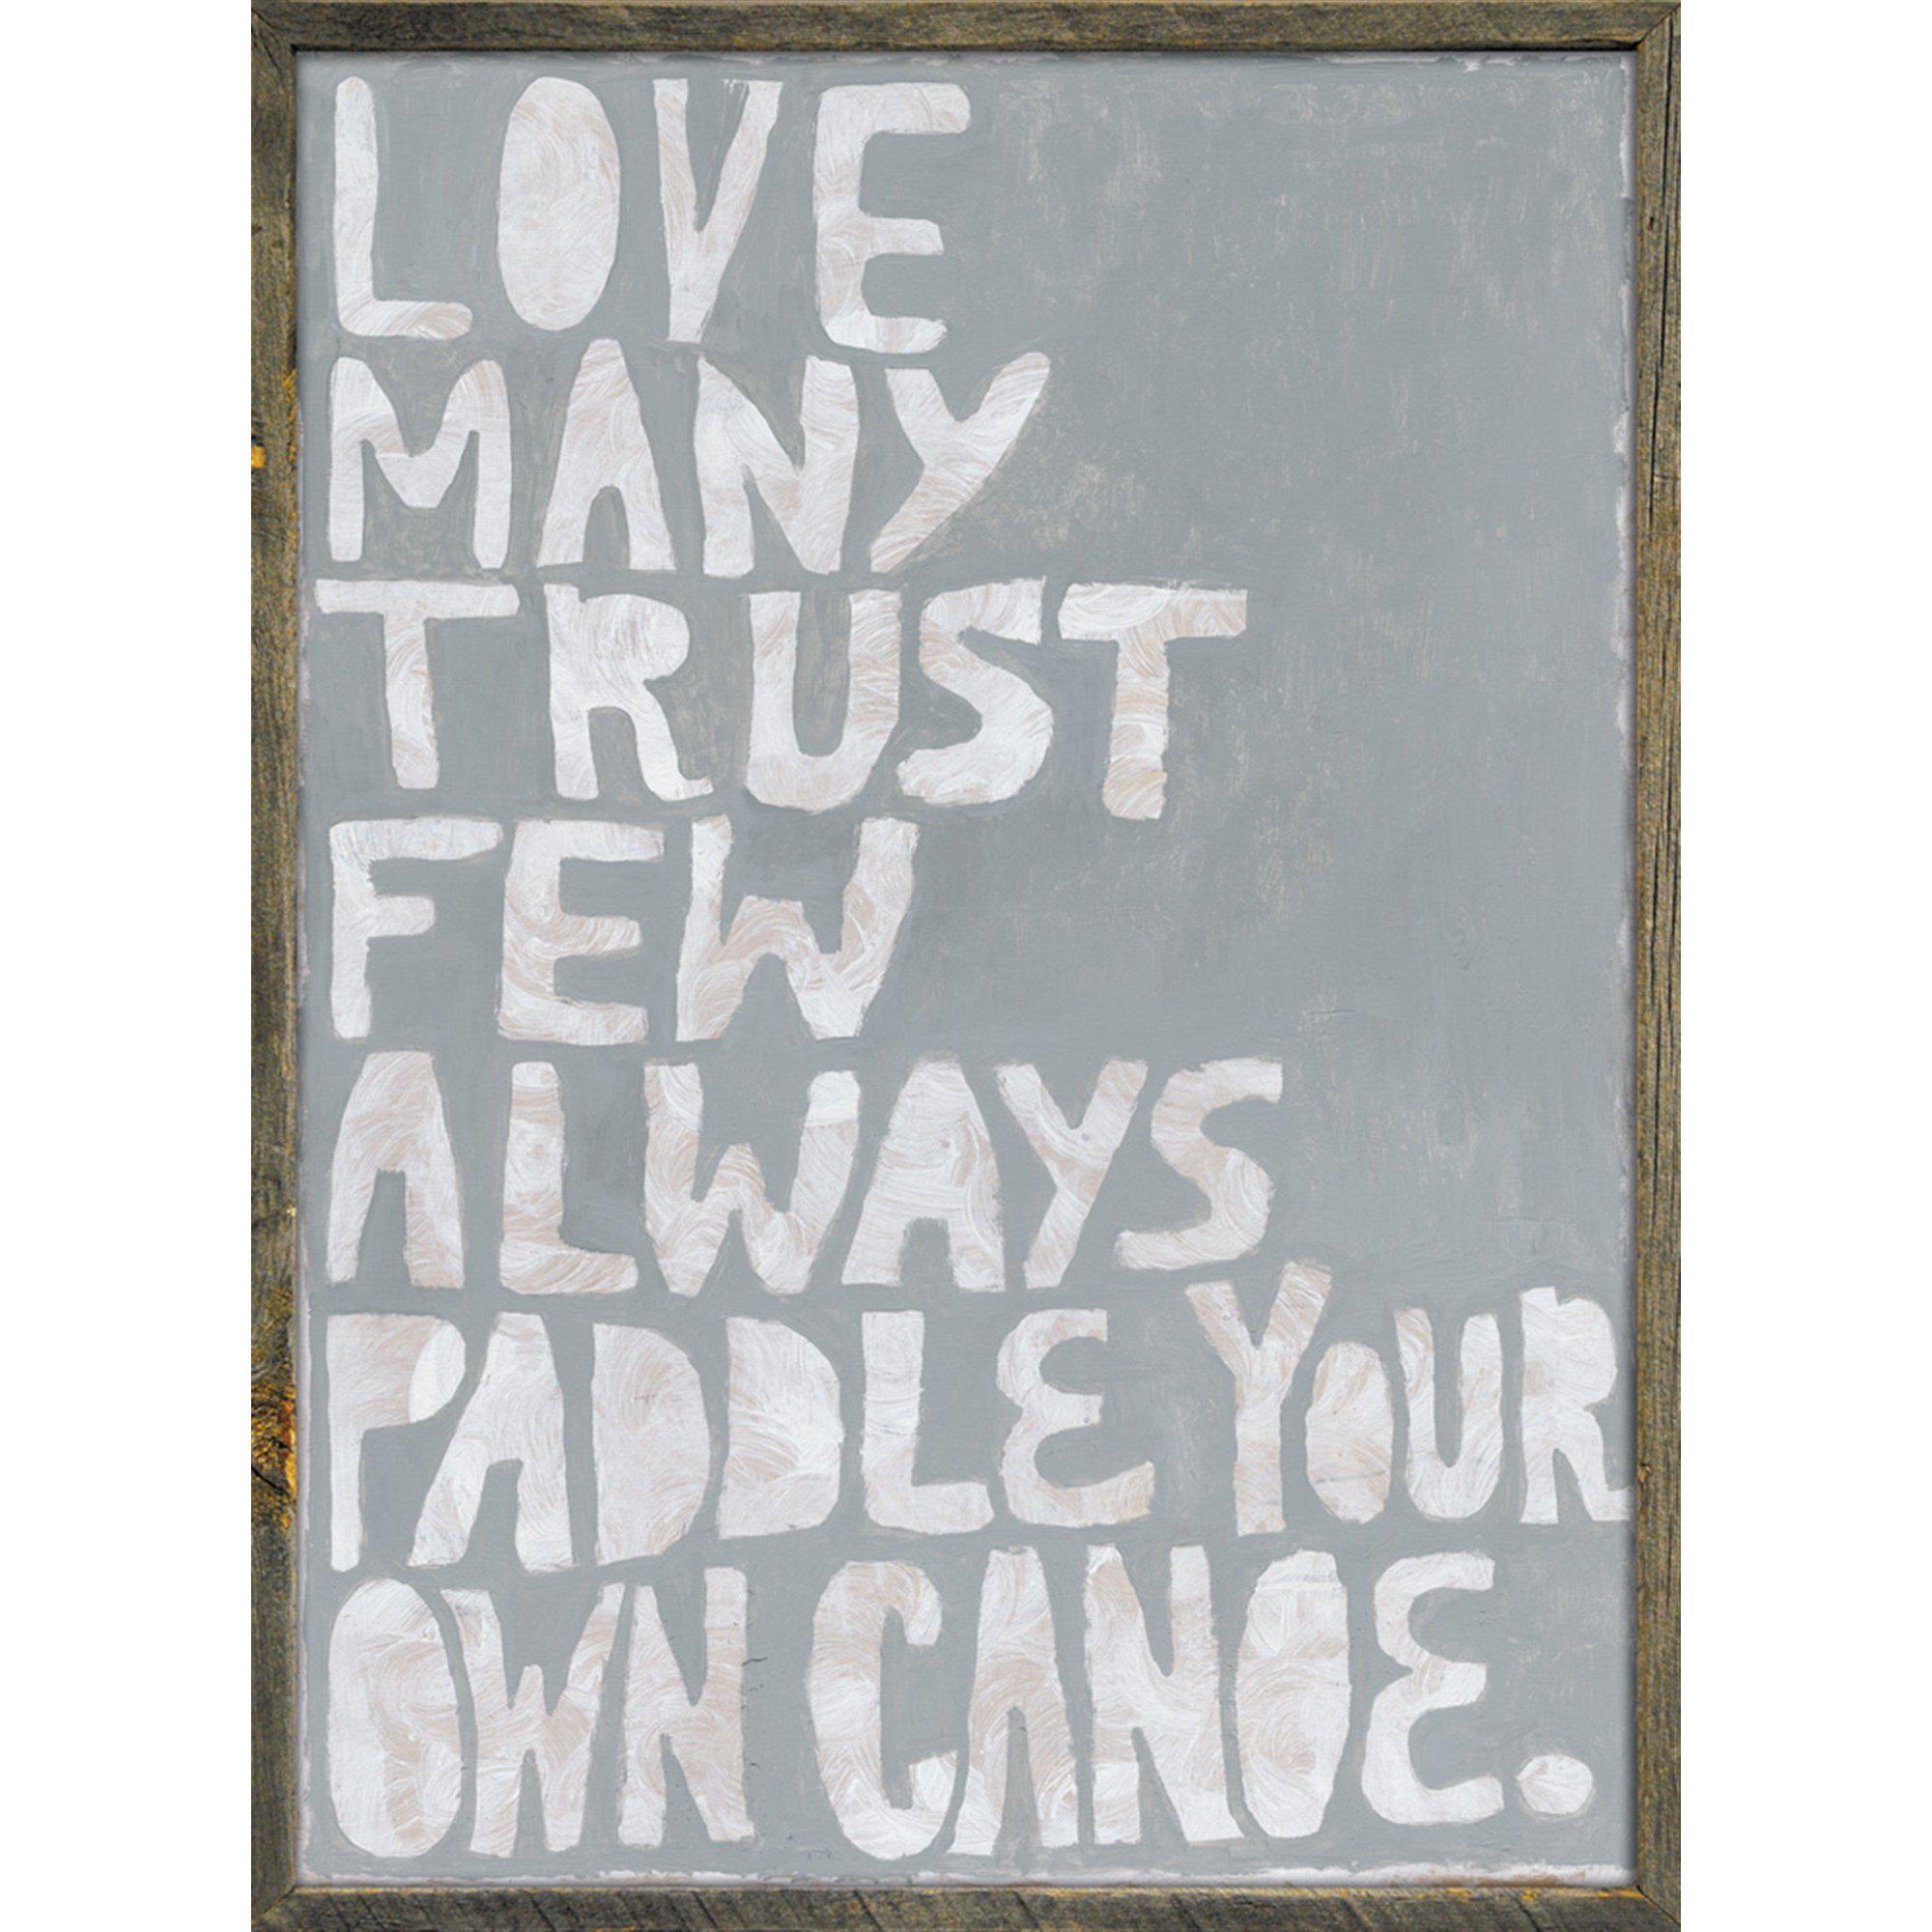 Sugarboo Designs Paddle Your Own Canoe Art Print